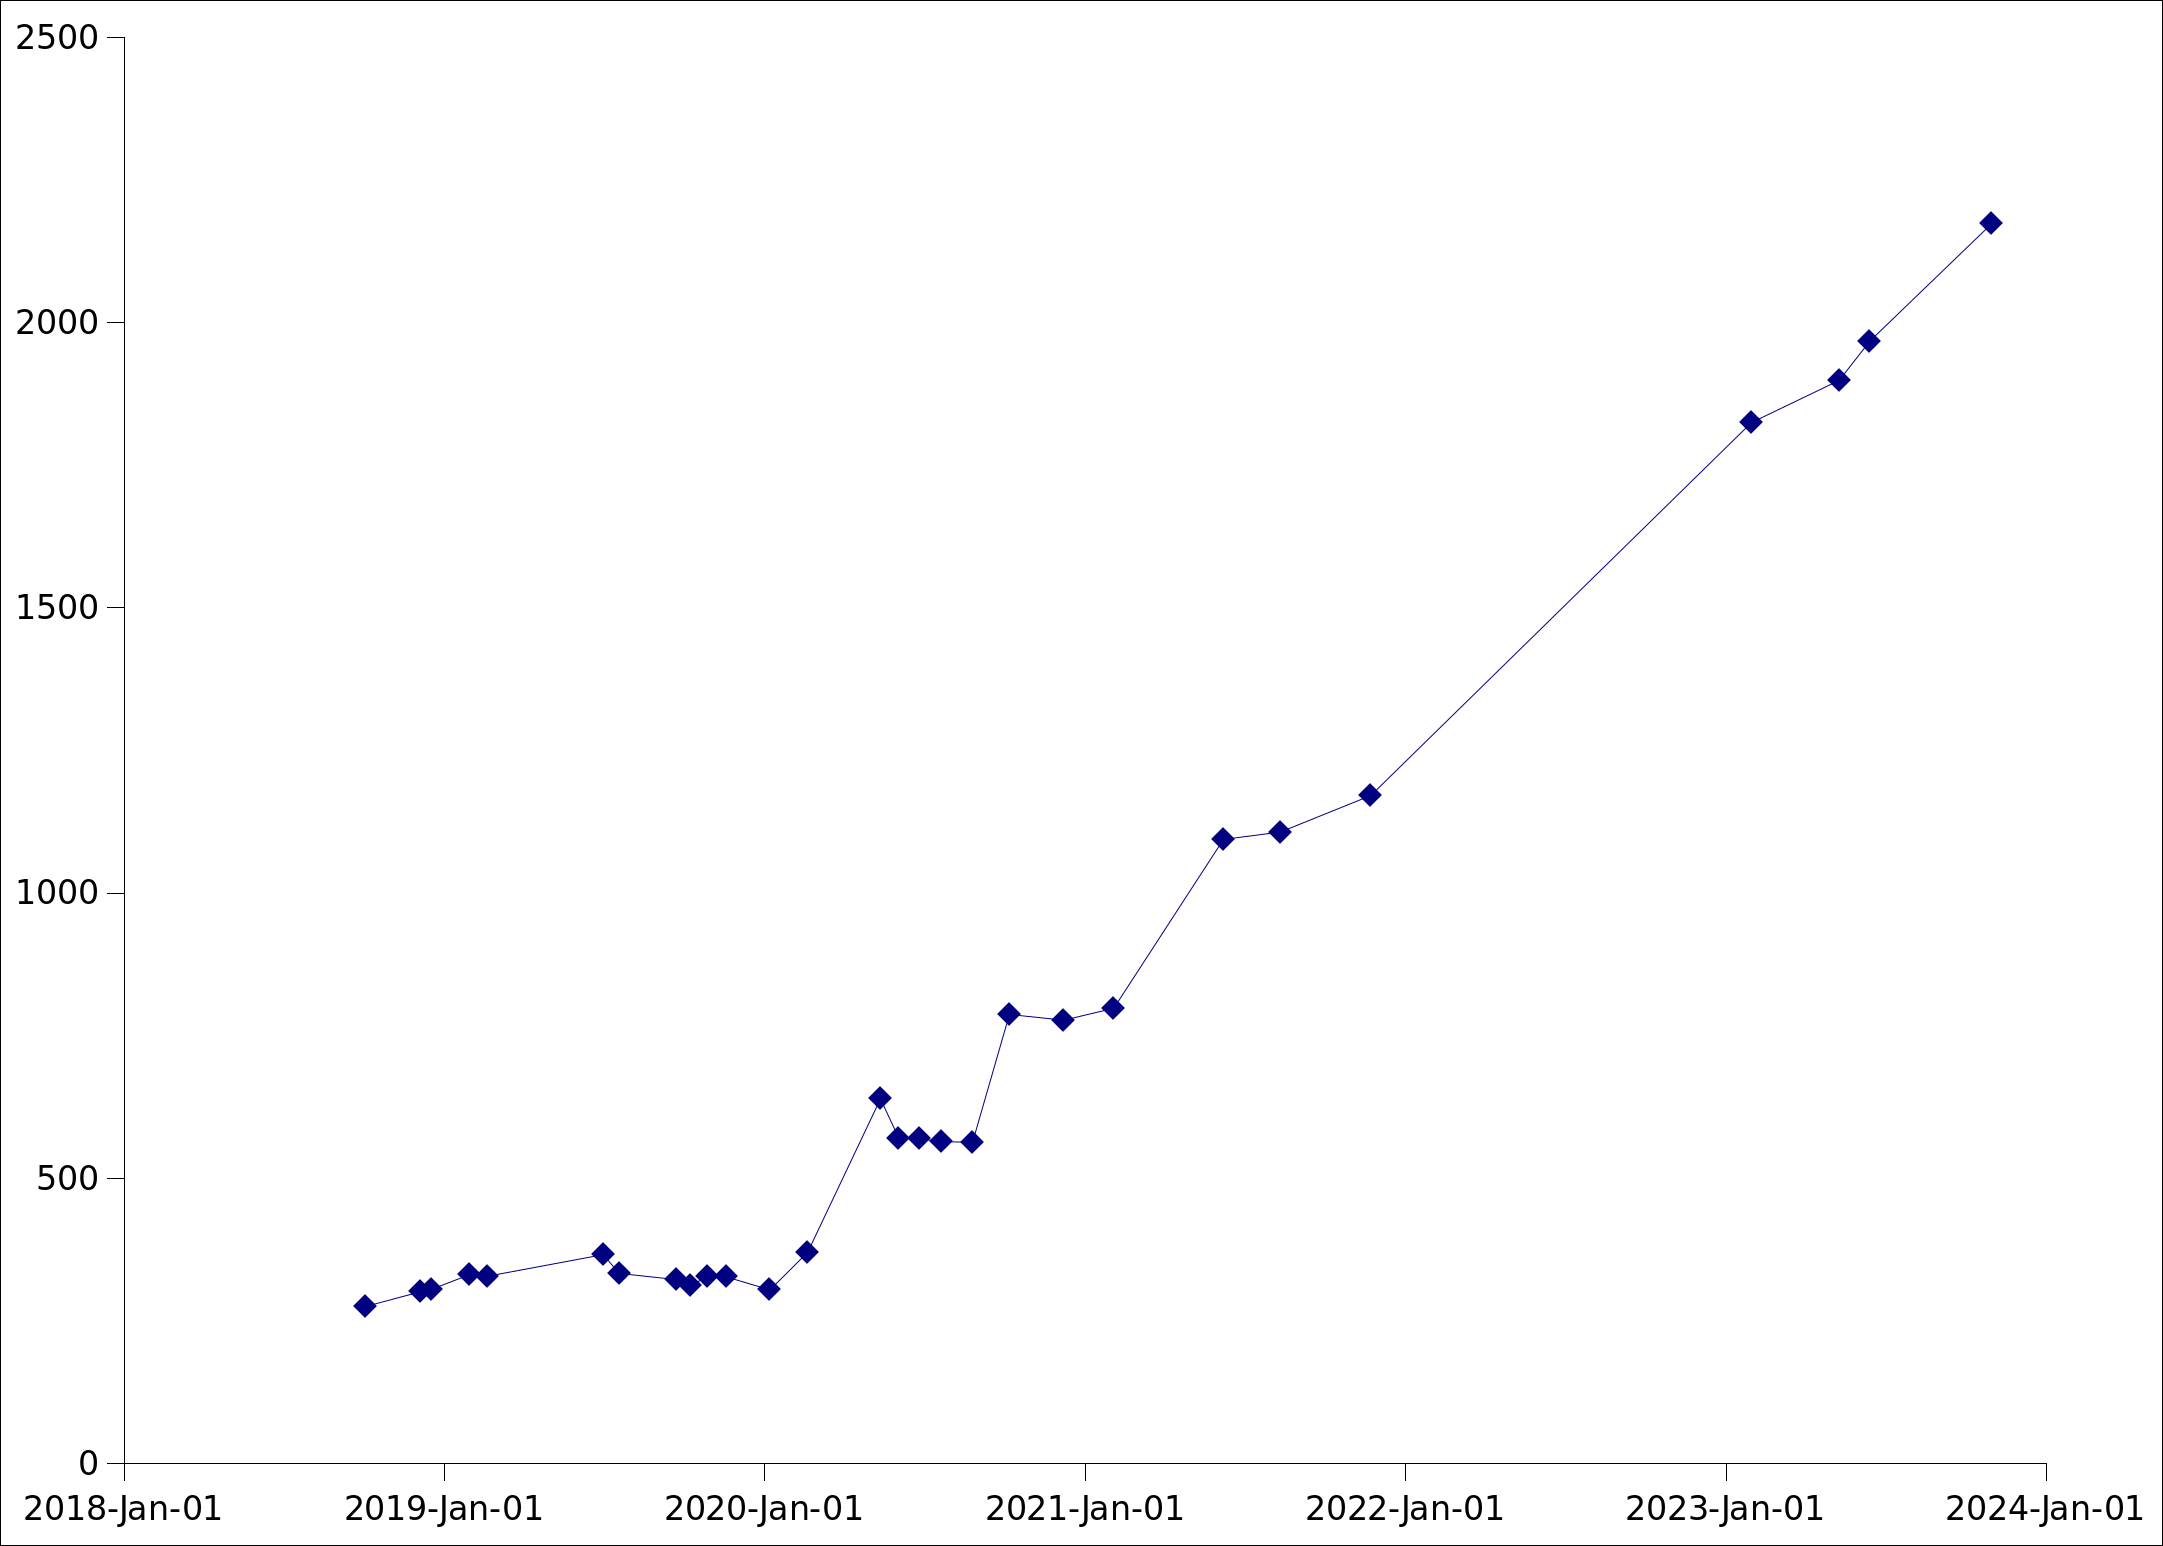 A line chart showing the growth of blocked domains in Privacy Badger’s pre-trained list from late 2018 (about 300 domains blocked by default) through 2023 (over 2000 domains blocked by default). There is a sharp jump in January 2023, from under 1200 to over 1800 domains blocked by default.